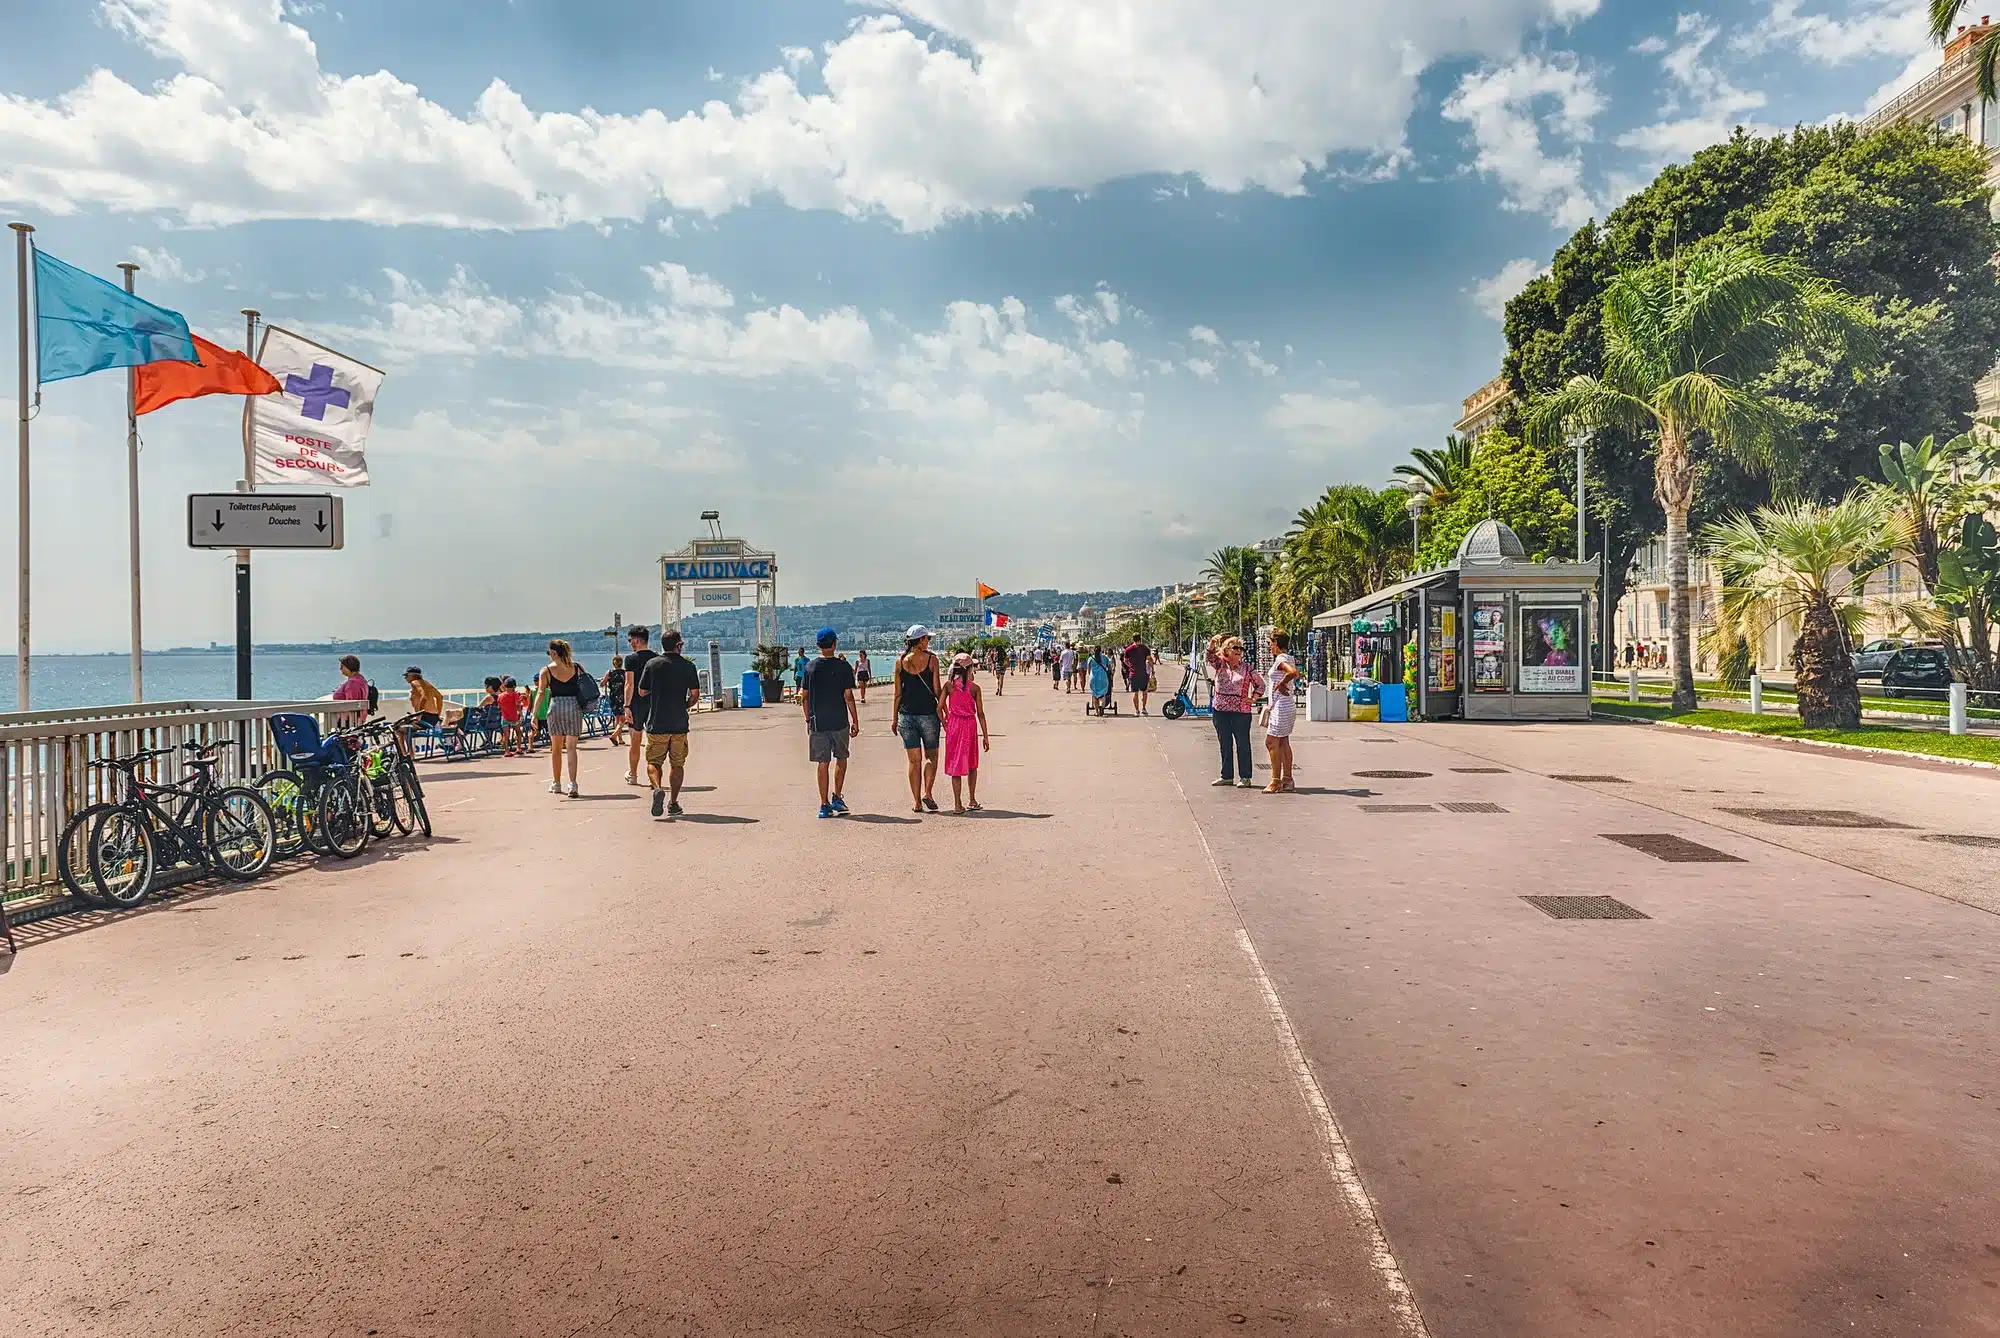 Promenade des Anglais, iconic walkway in Nice, Cote d'Azur, France